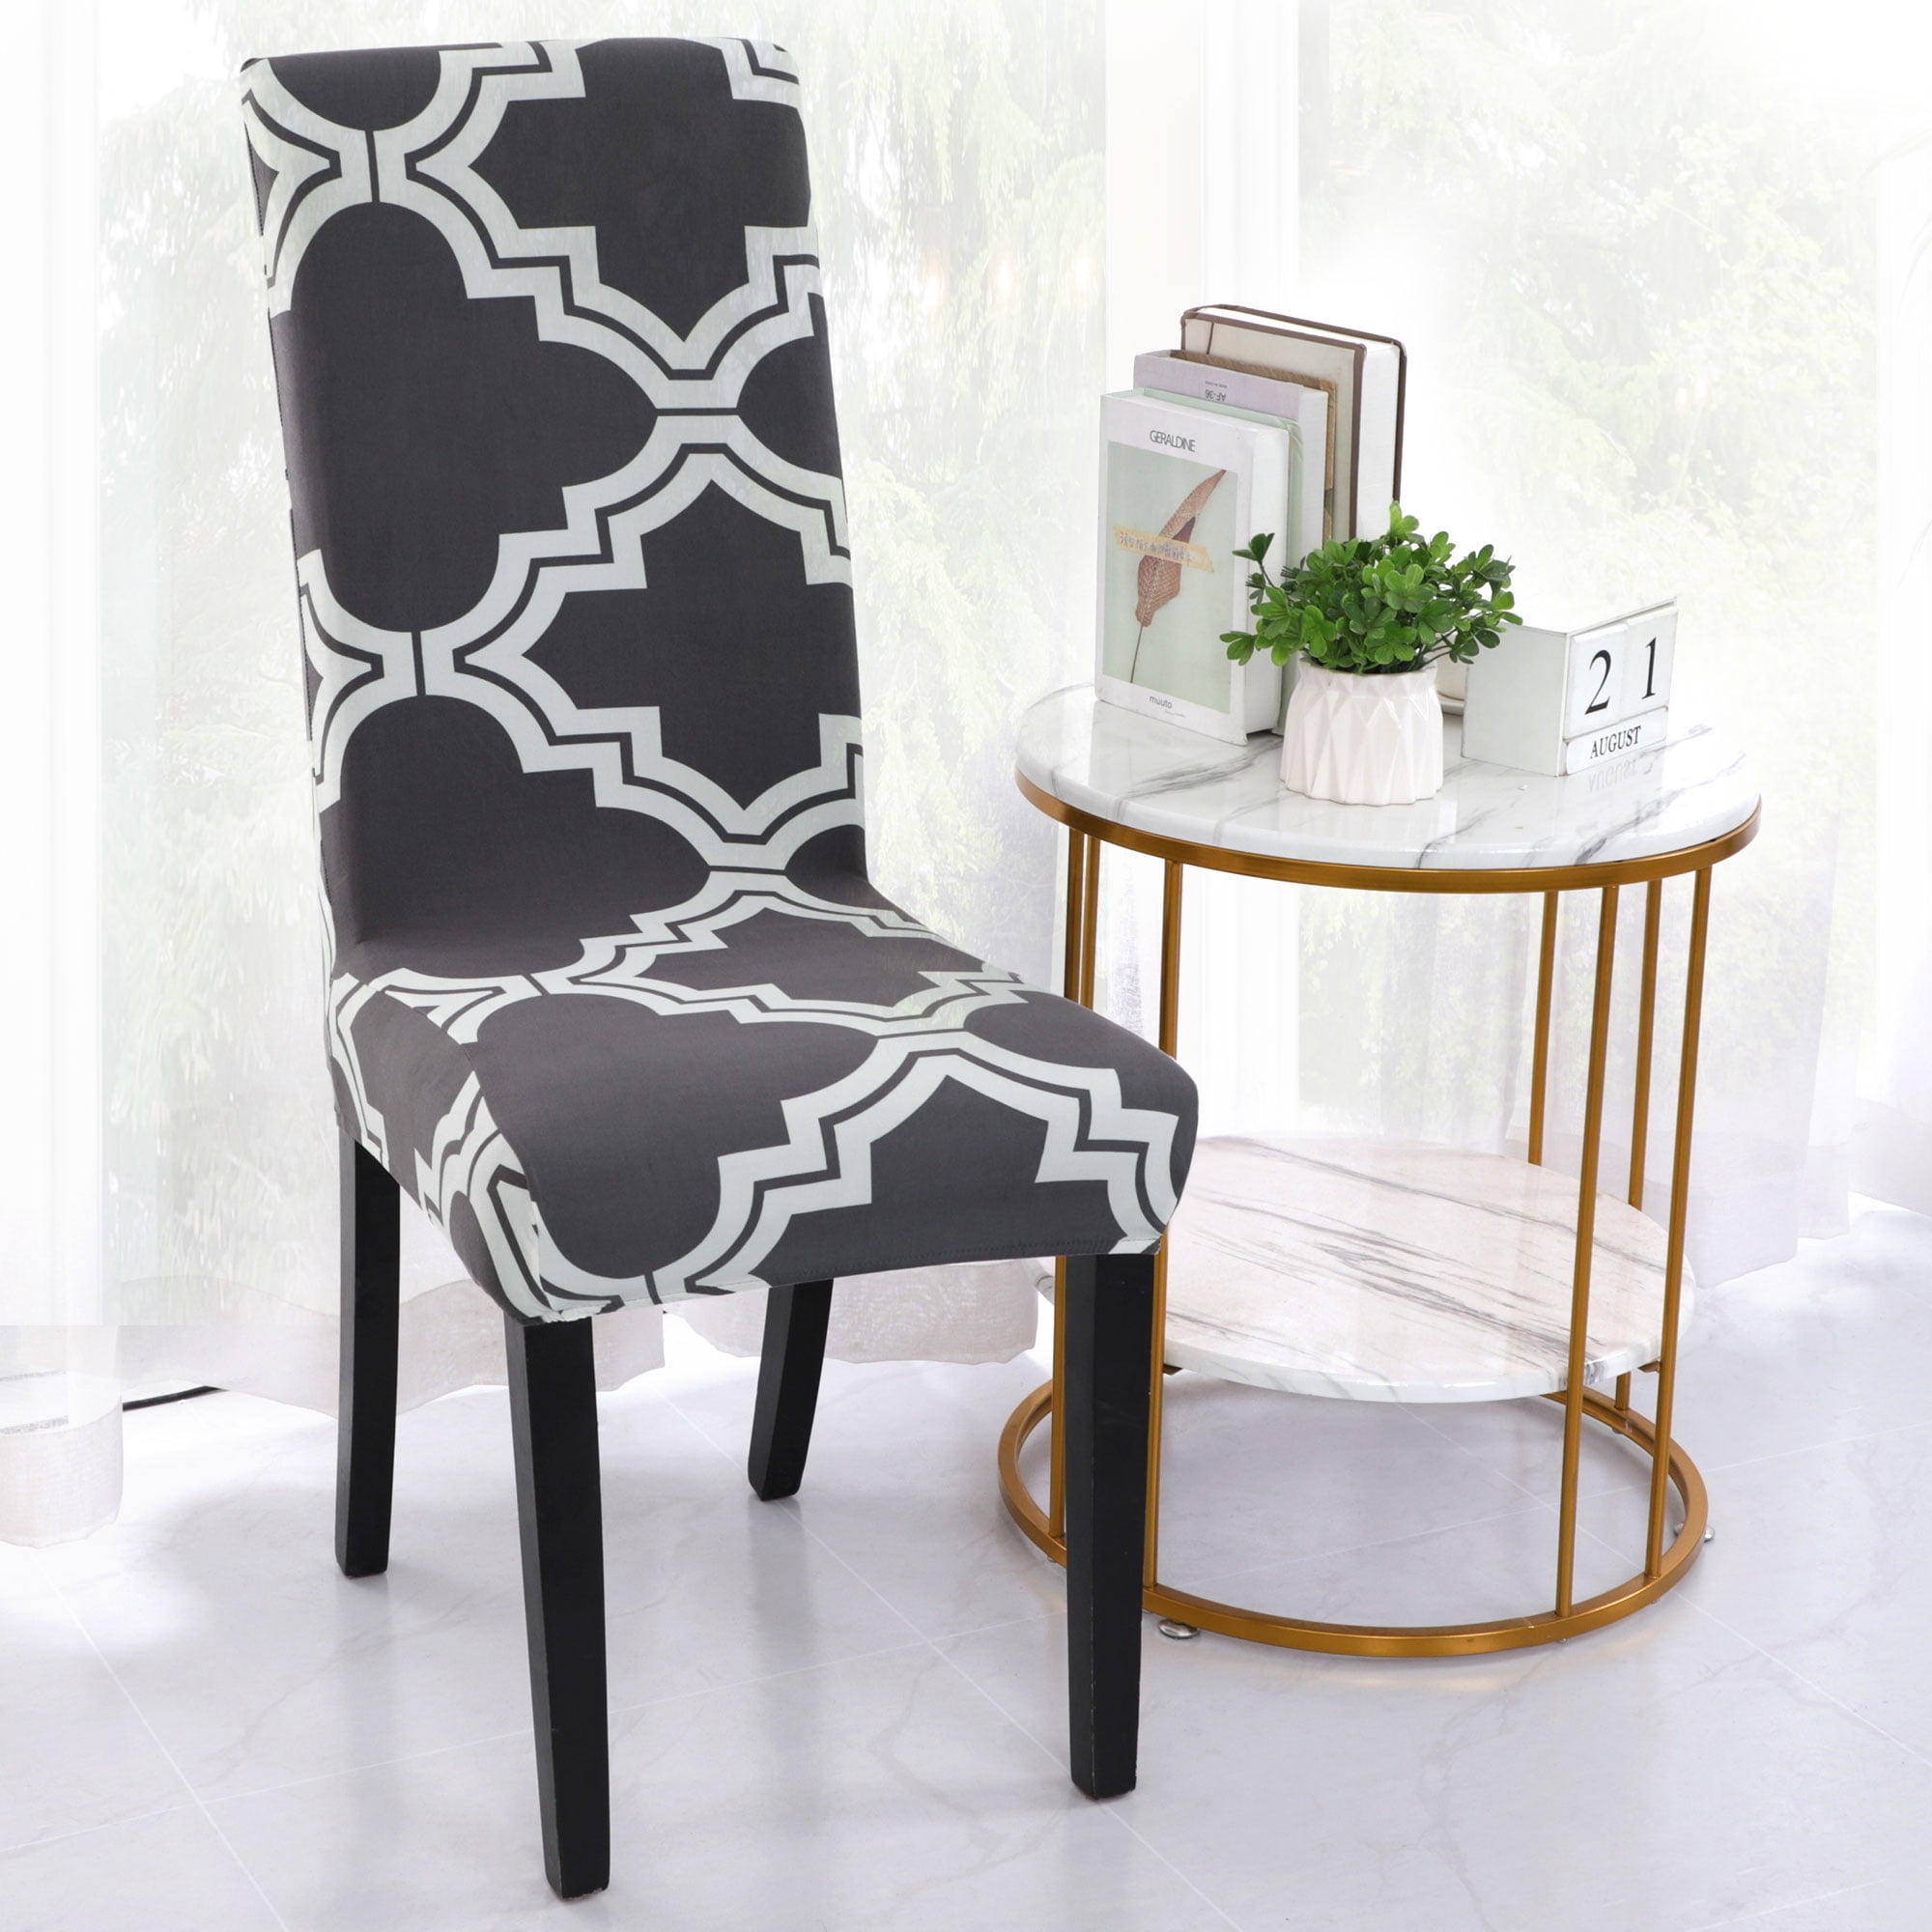 Details about   Geometric Dining Chair Covers Spandex Elastic Chair Slipcover Case Chair Covers 